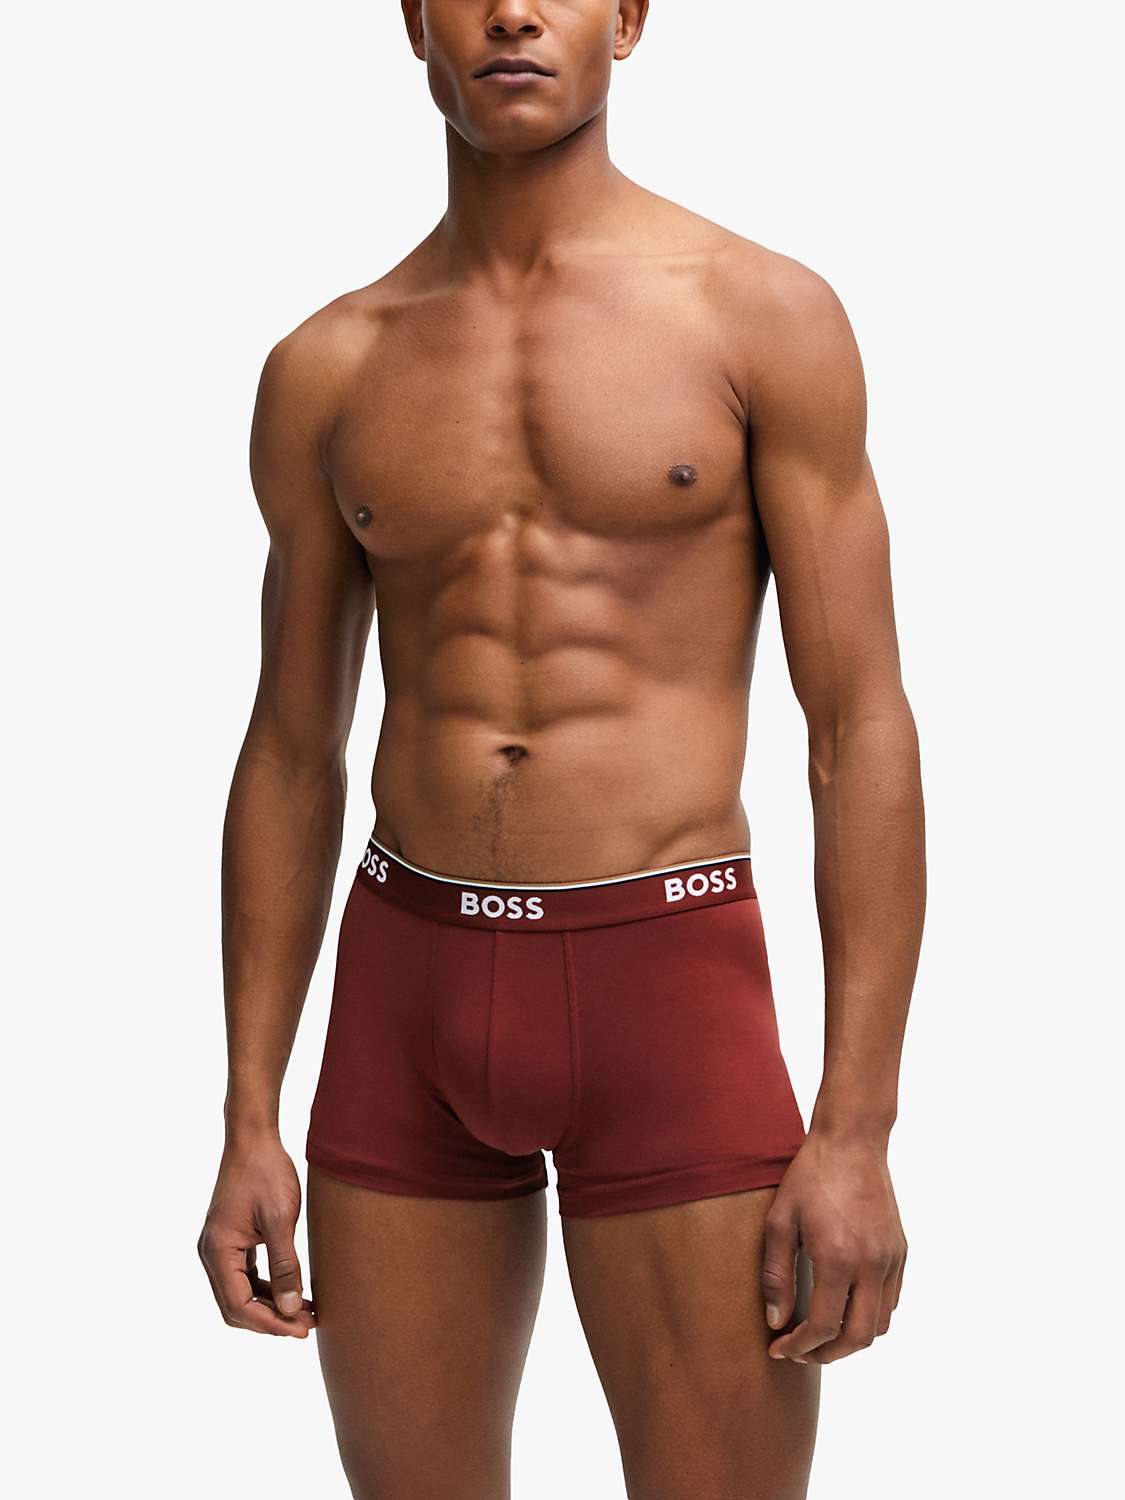 Buy BOSS Essential Everyday Trunks, Pack of 3, Multi Online at johnlewis.com